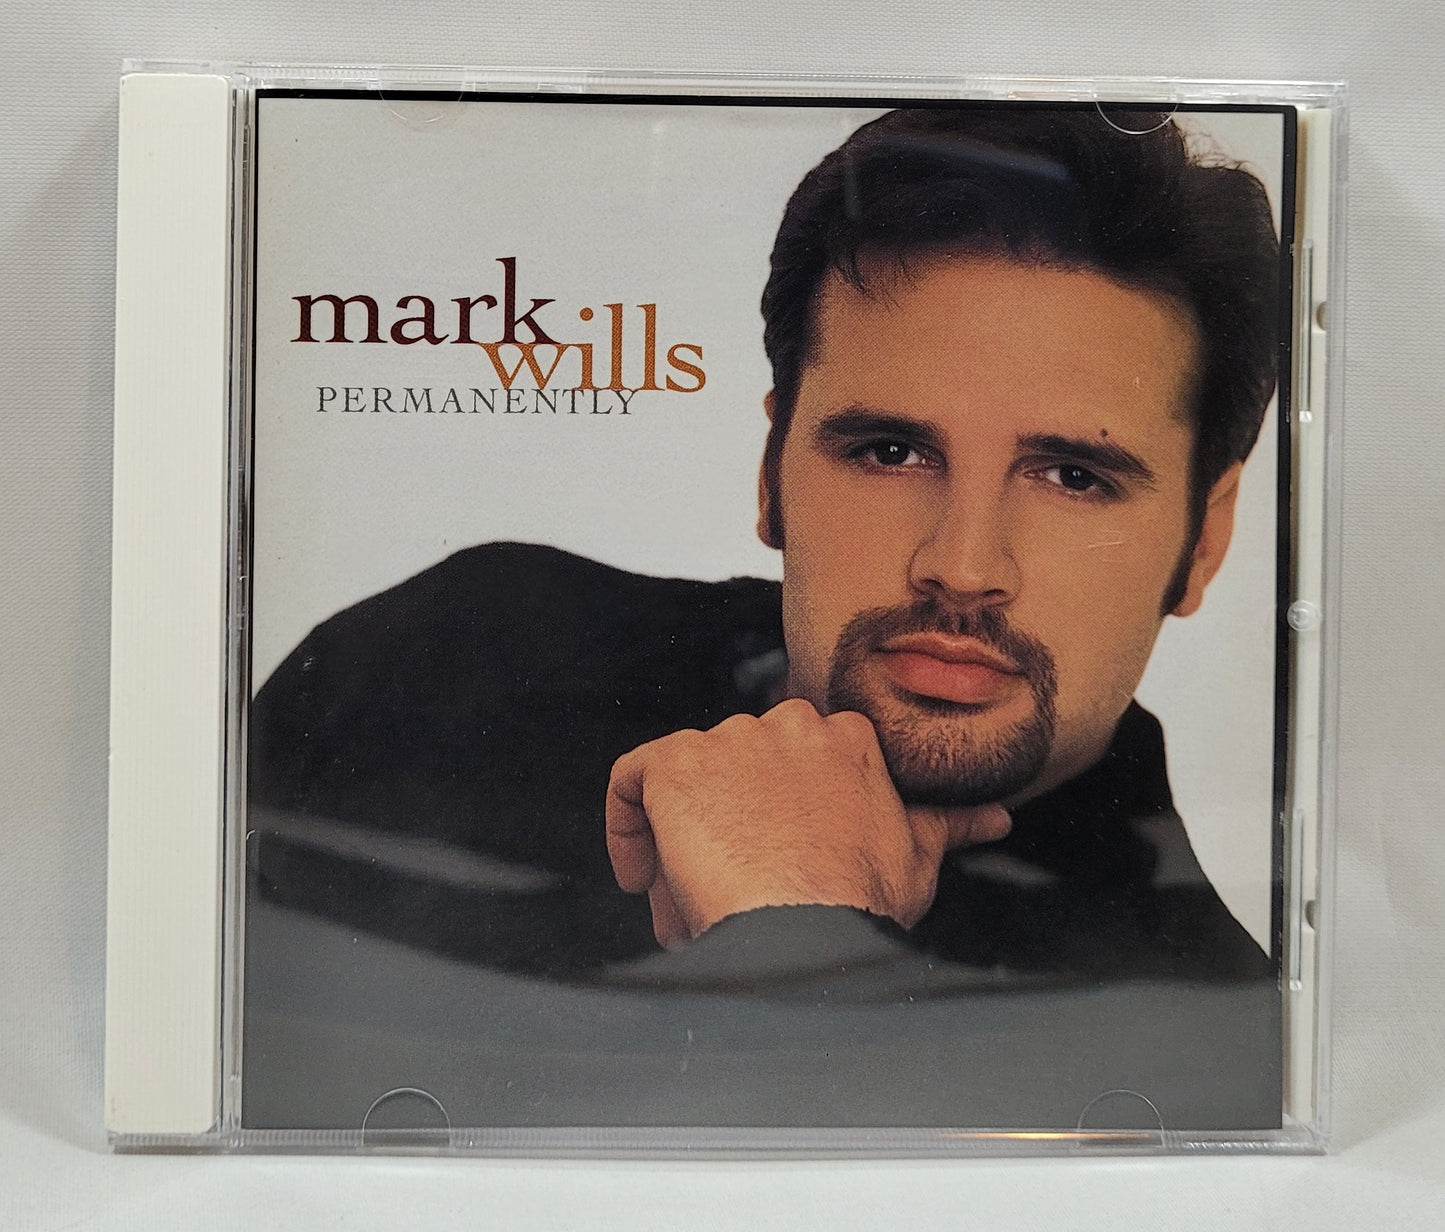 Mark Wills - Permanently [2000 Club Edition] [Used CD]